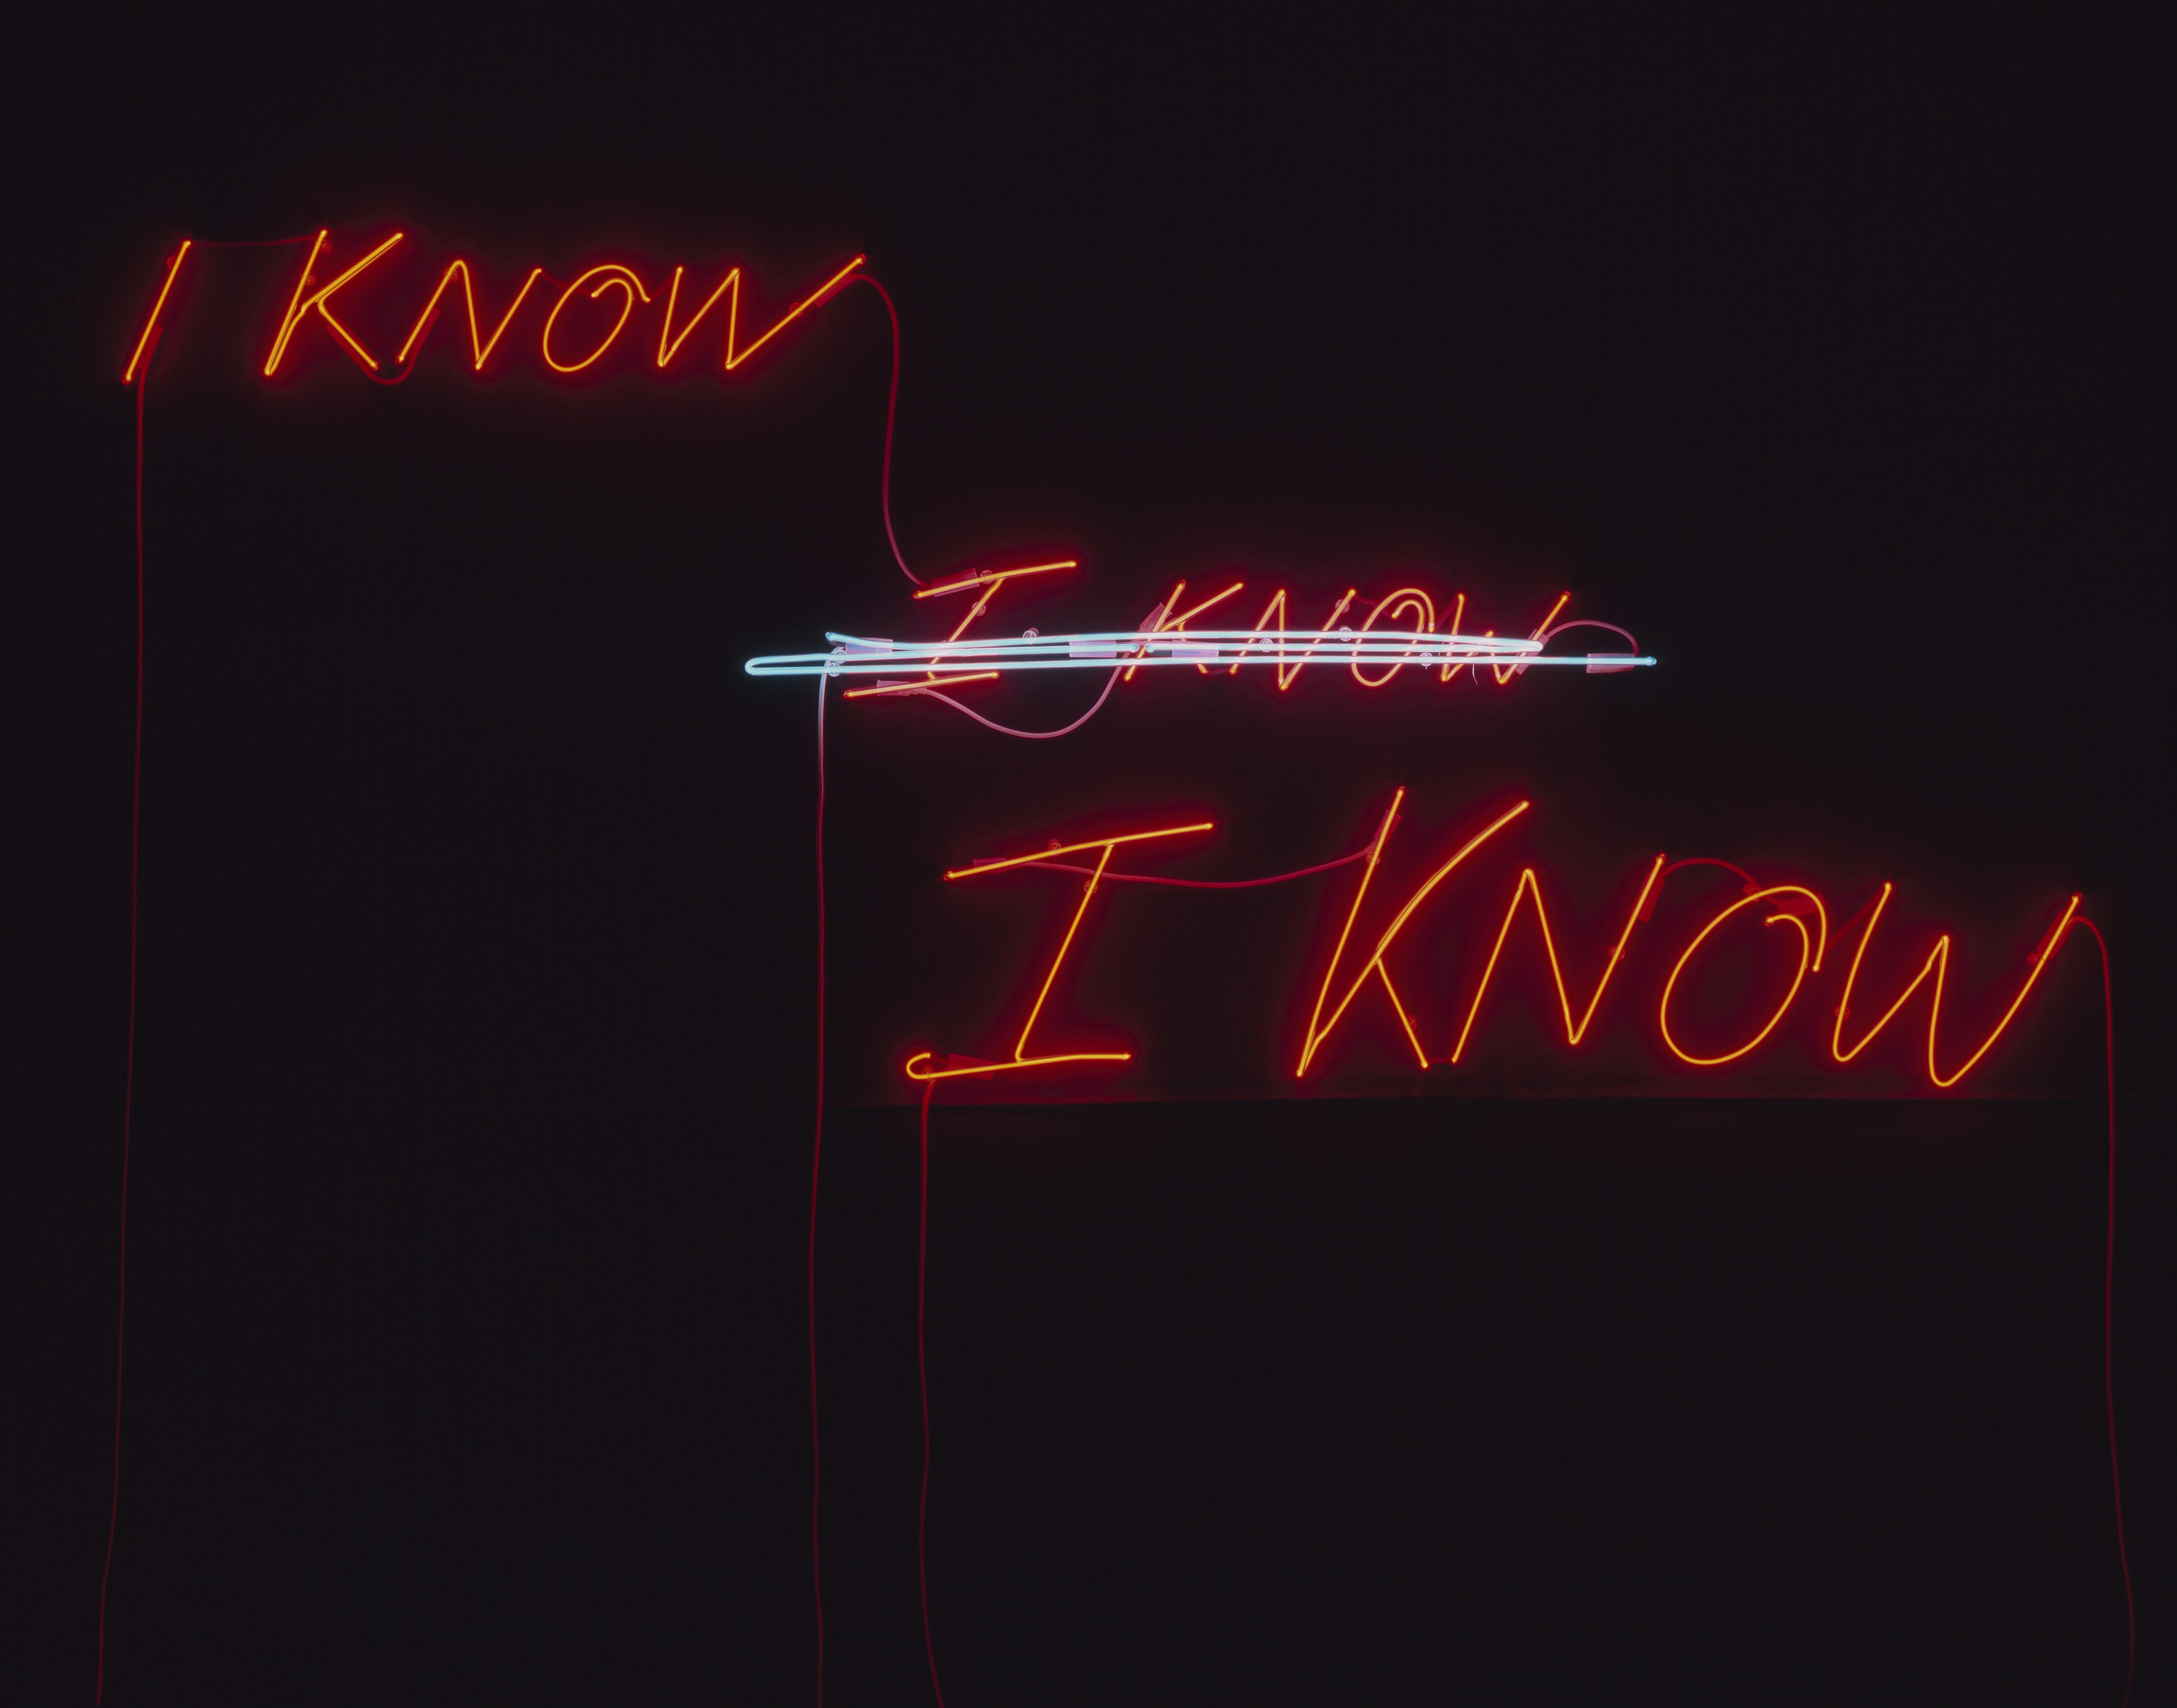 tracey-emin-i-know-i-know-i-know-2002-high-res